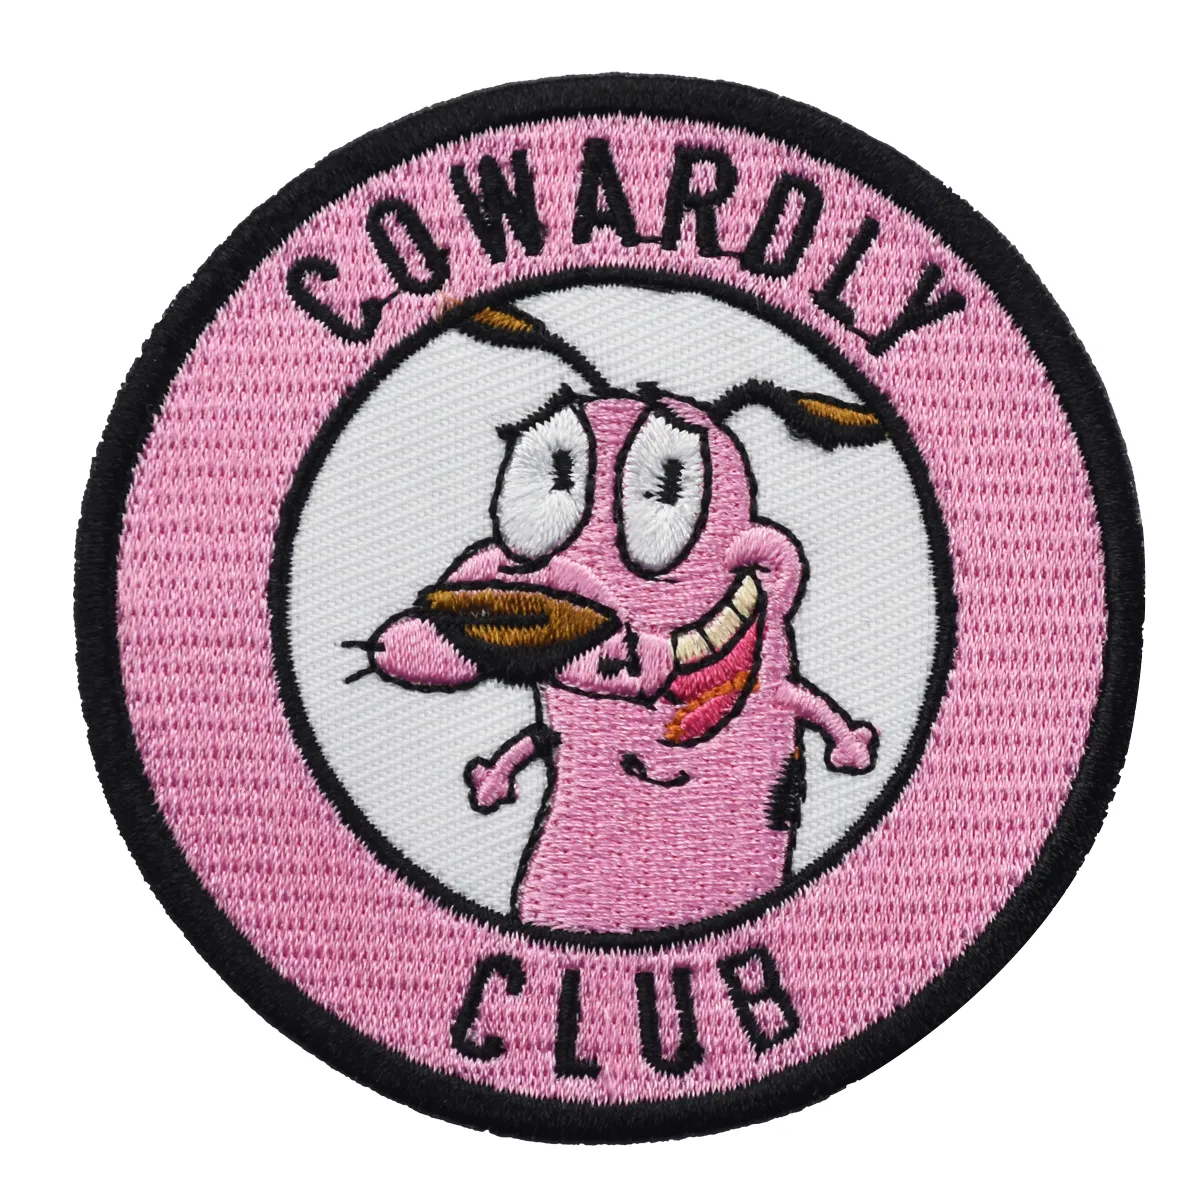 Hot Sell Pink COWARDLY CLUB Dog Embroidery Patches Front Size Iron On Sew On Applique Decoration For Clothing